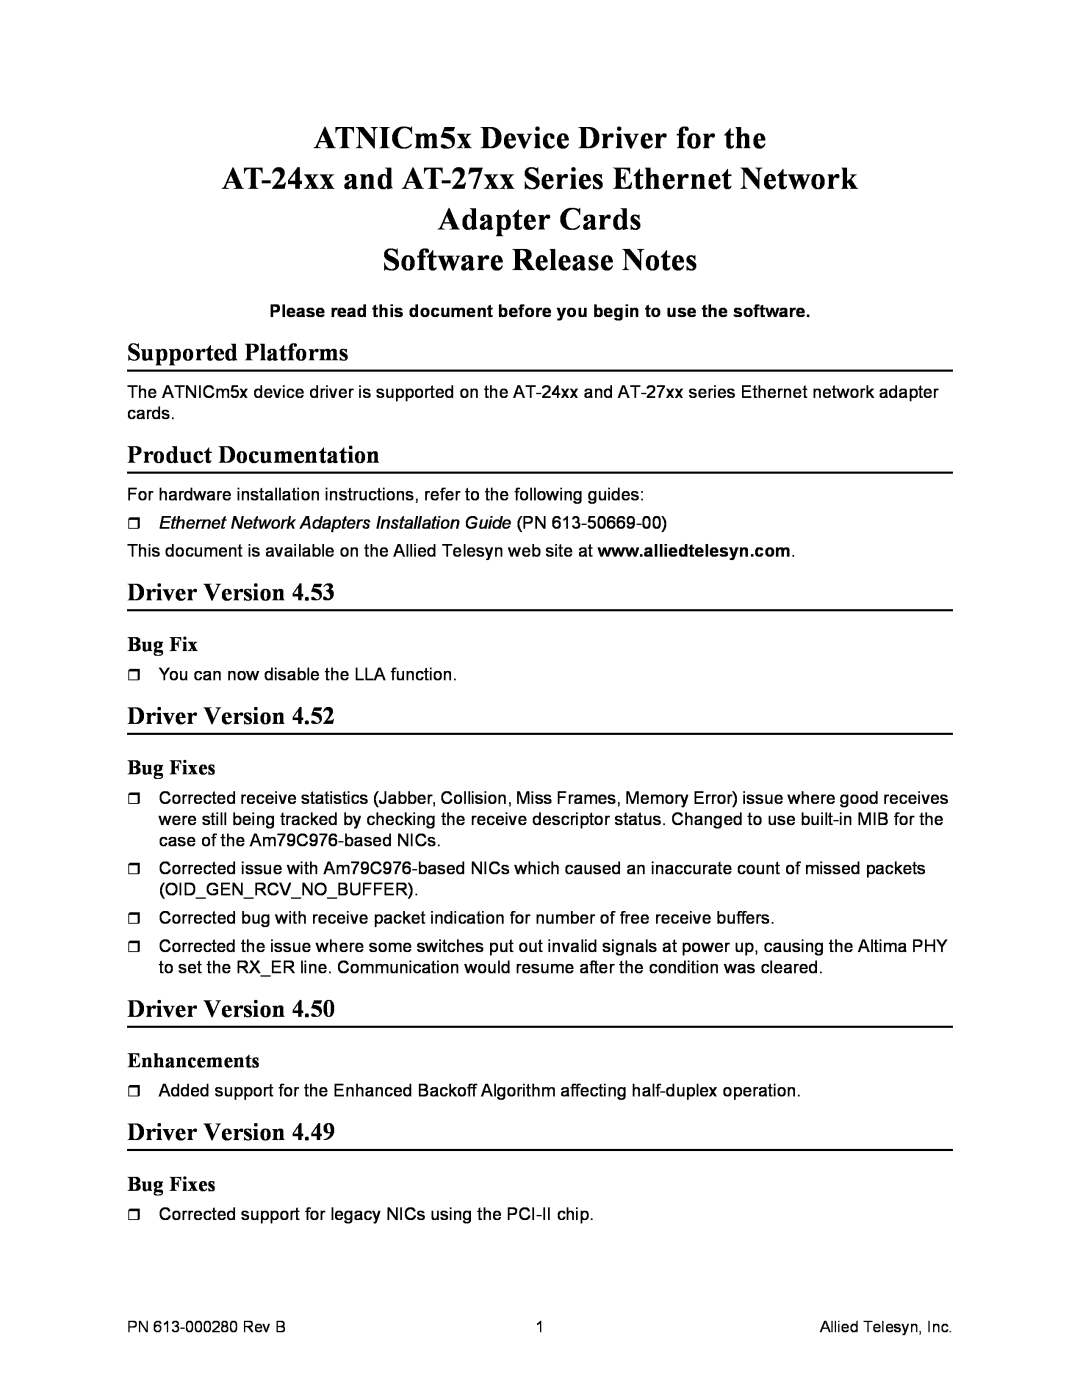 Allied Telesis AT-24xx installation instructions Supported Platforms, Product Documentation, Driver Version, Bug Fix 